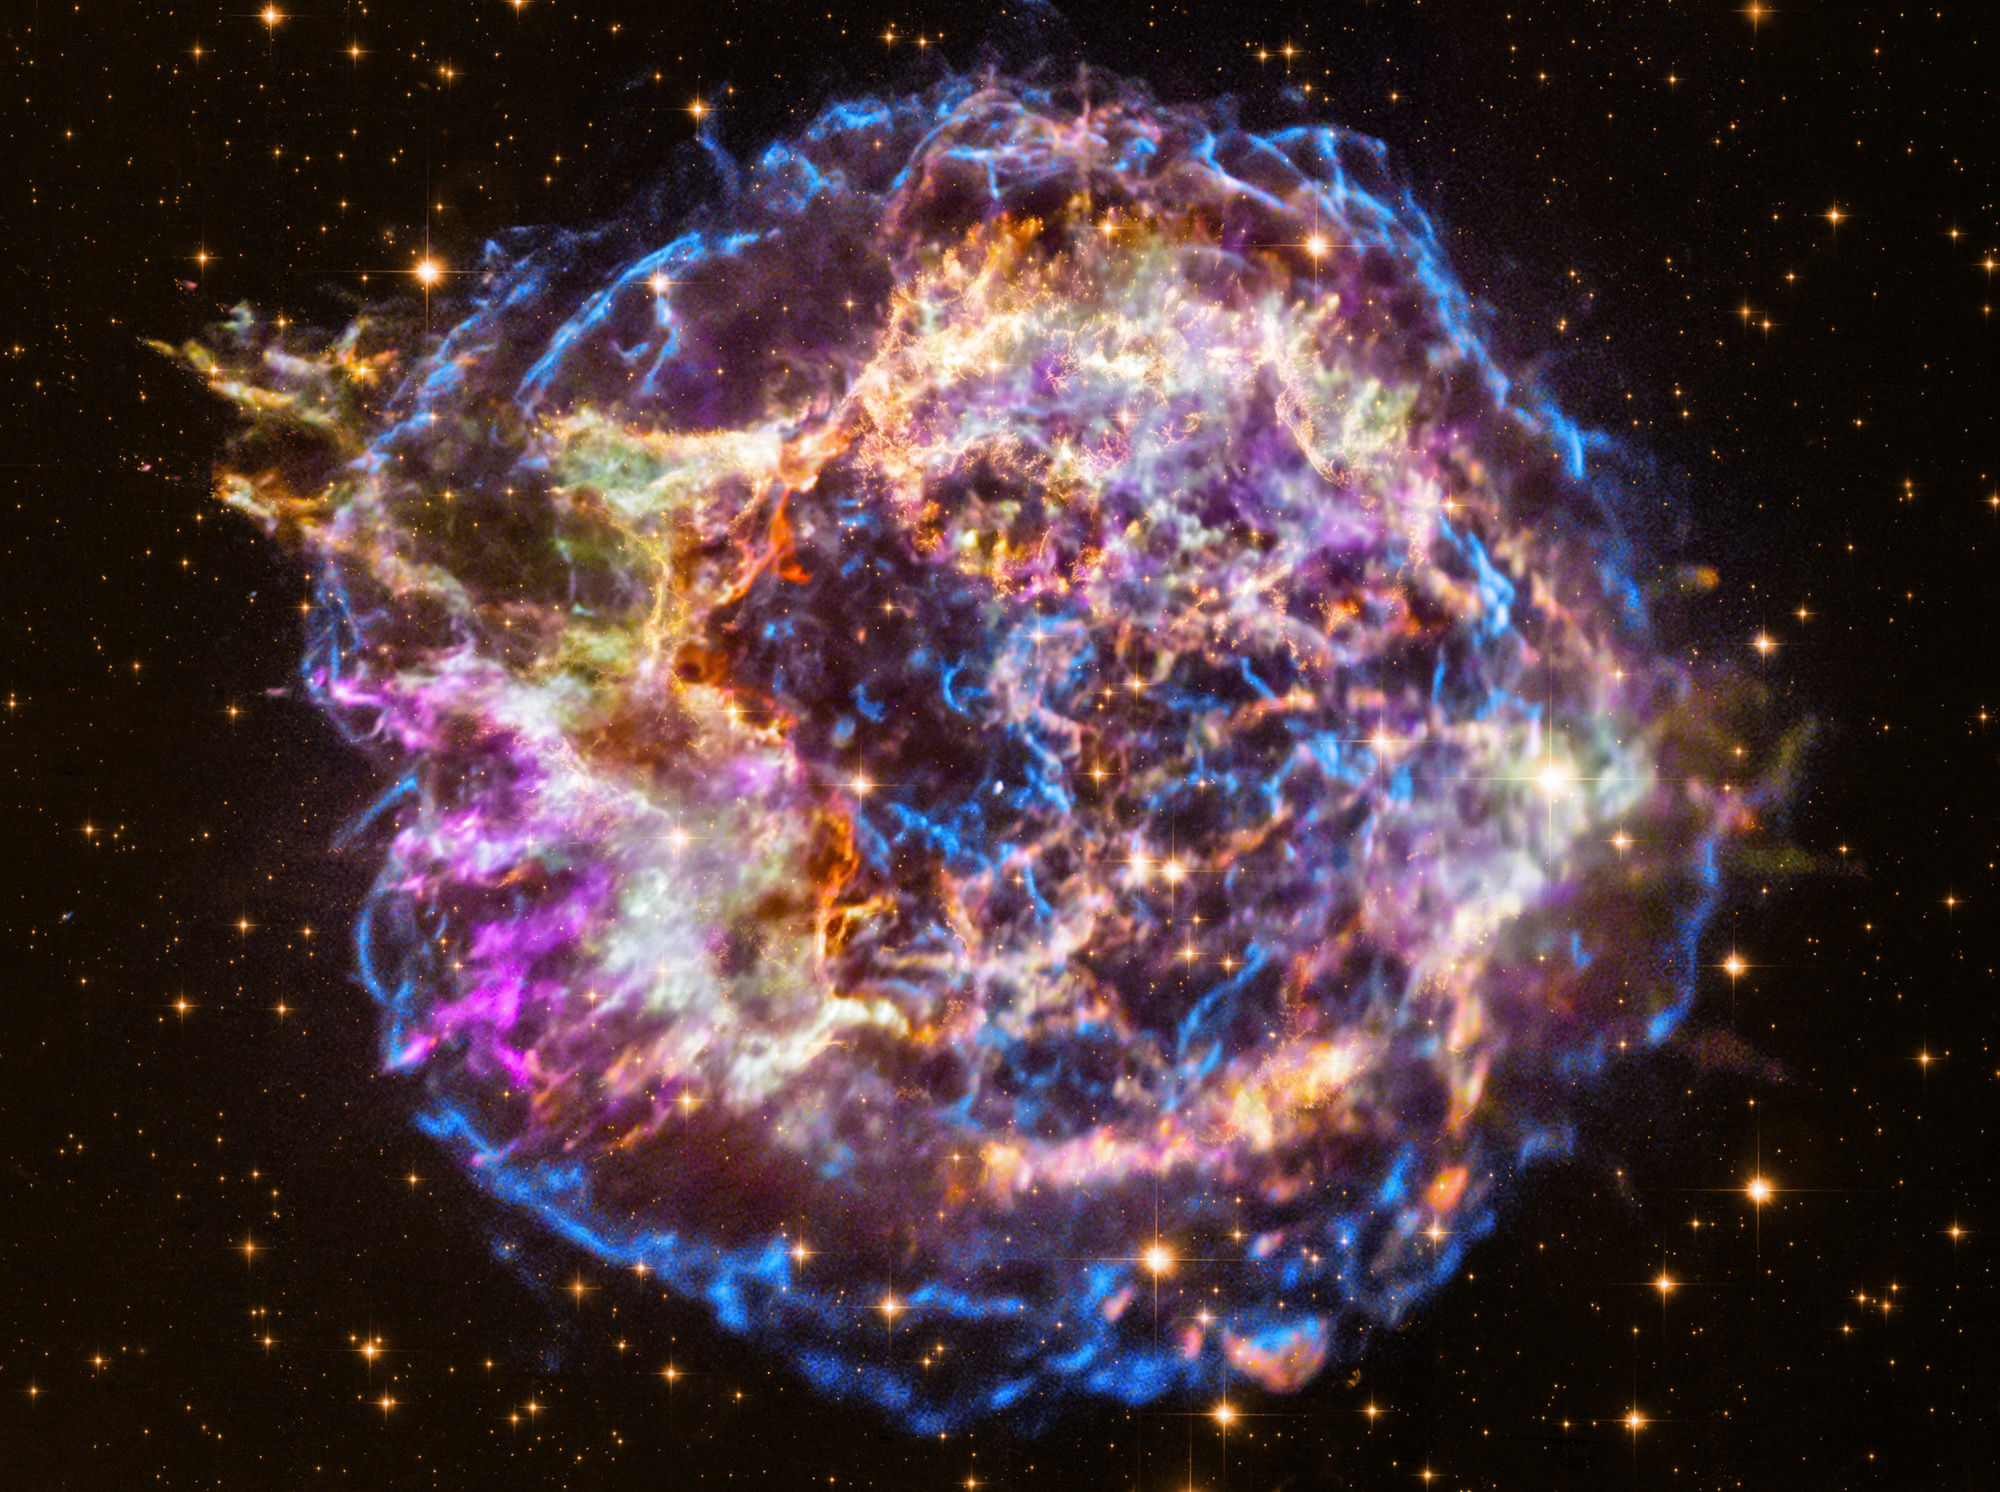 A stunning image of the supernova remnant Cas A combines visible light images from Hubble with X-ray observations by Chandra. The different colors represent different energies of the light.